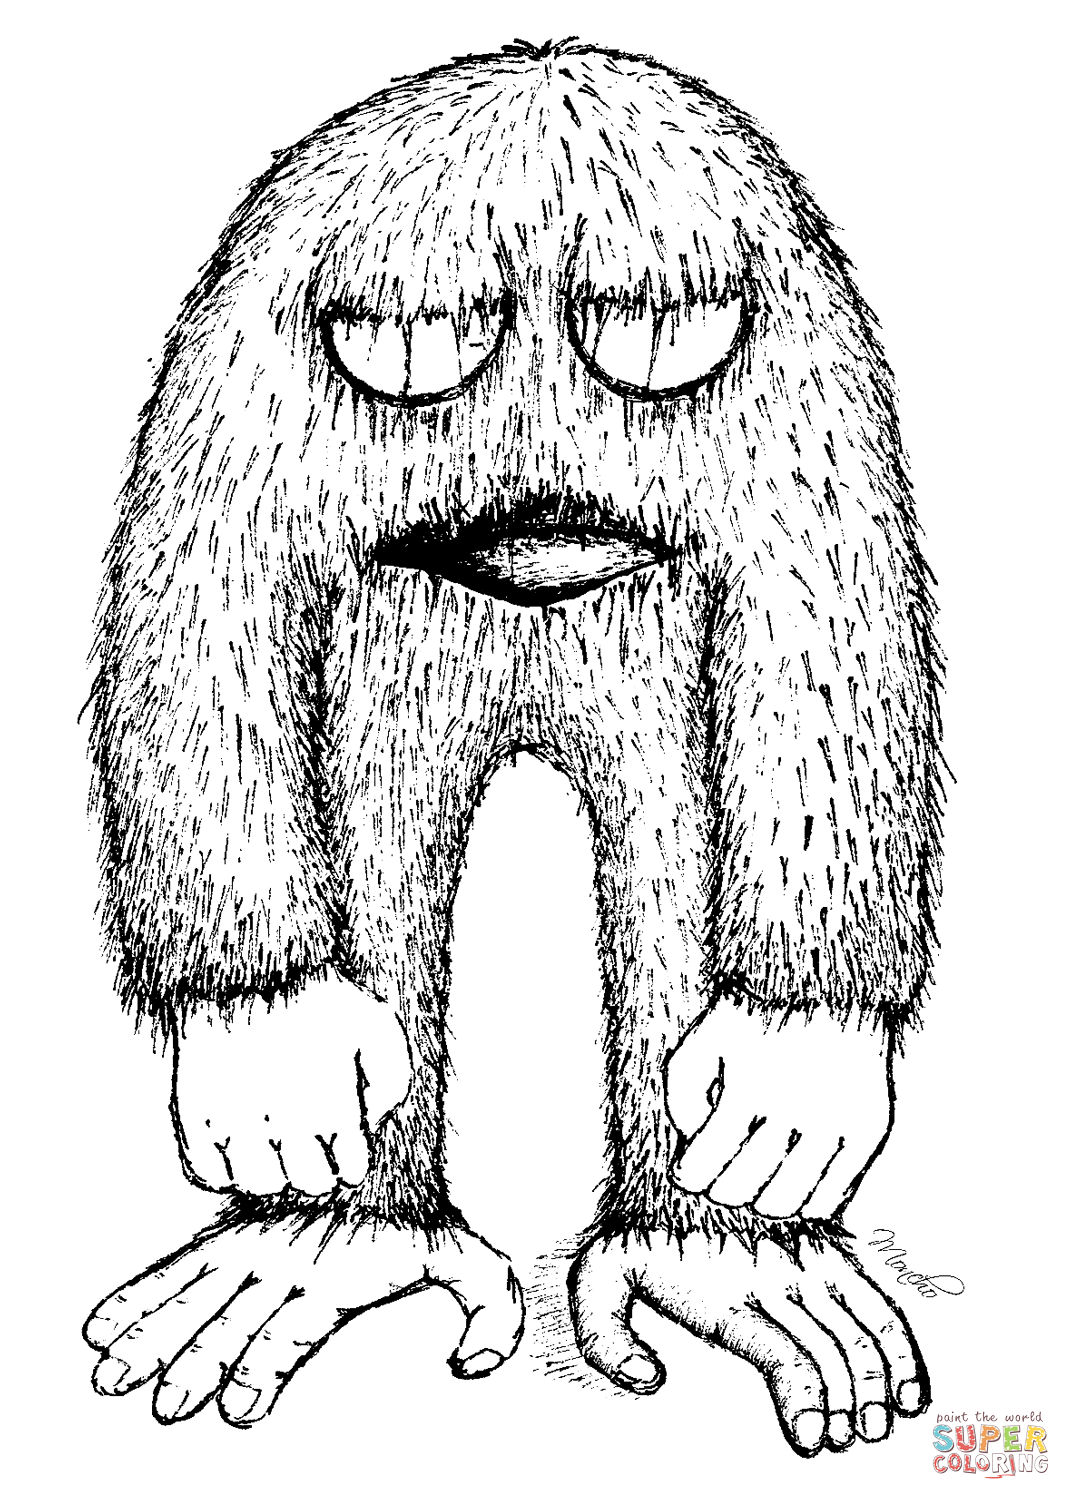 Coloring Pages : Excelent Bigfoot Coloring Pages Bigfoot Coloring Pages